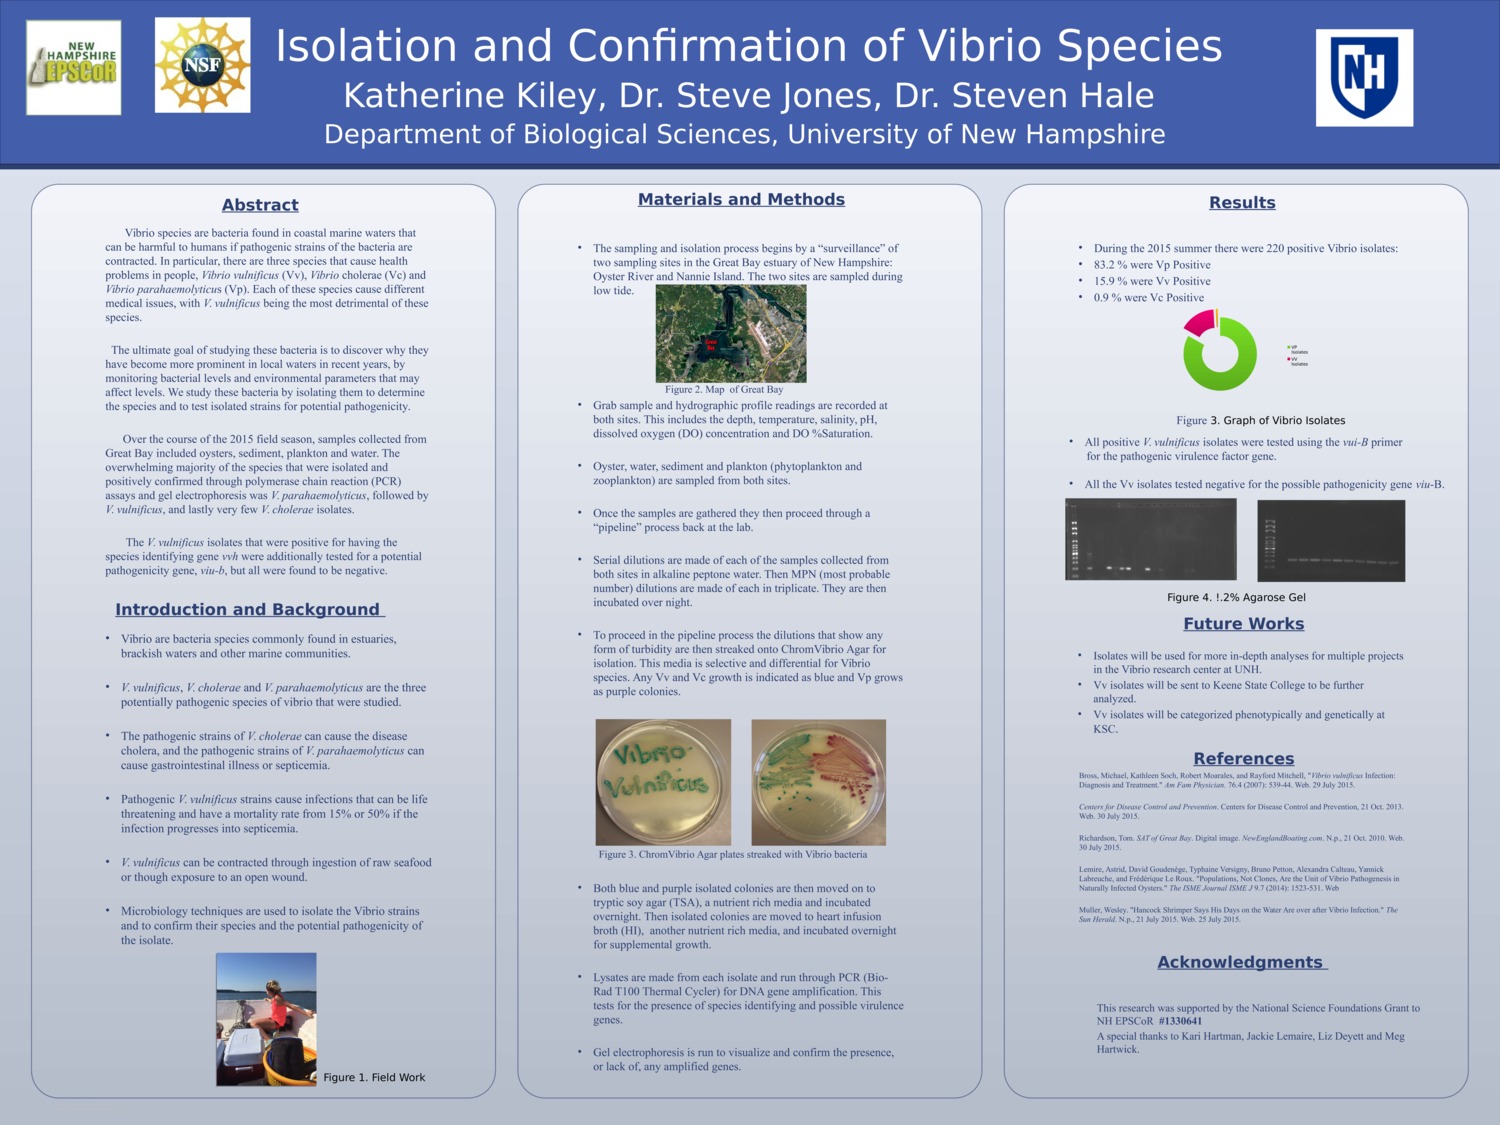 Isolation And Confirmation Of Vibrio Species by kakk1202